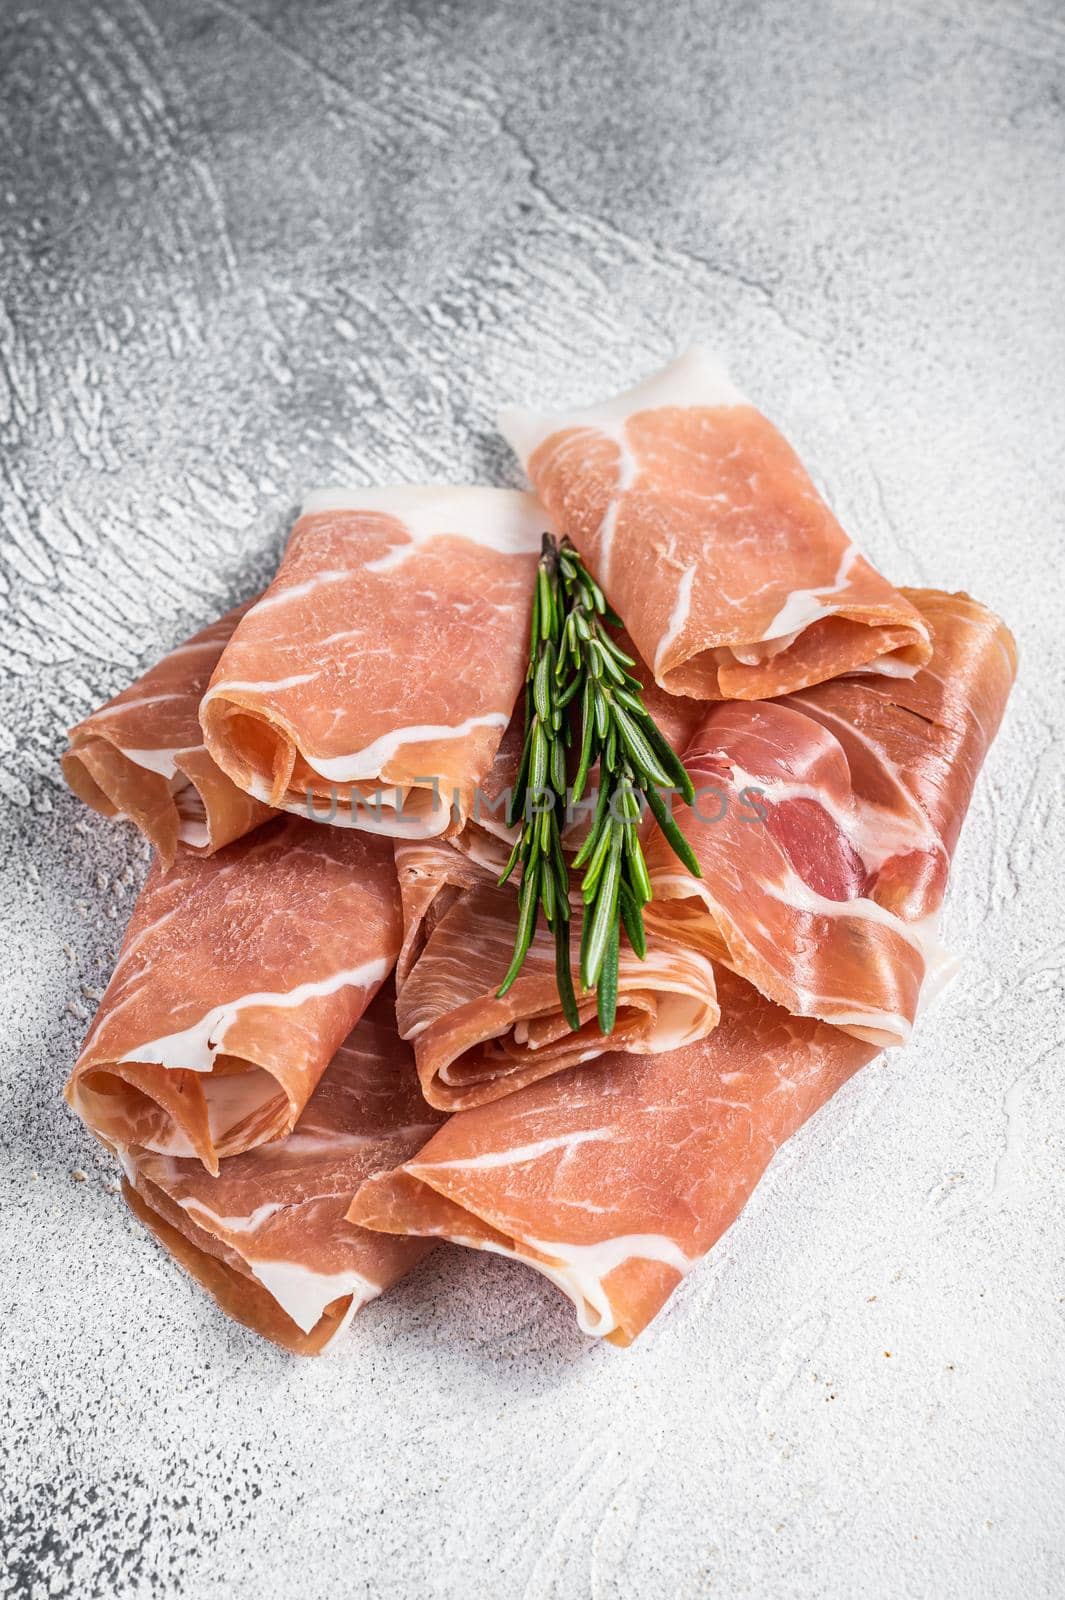 Italian prosciutto crudo parma ham on a table. White background. Top View by Composter